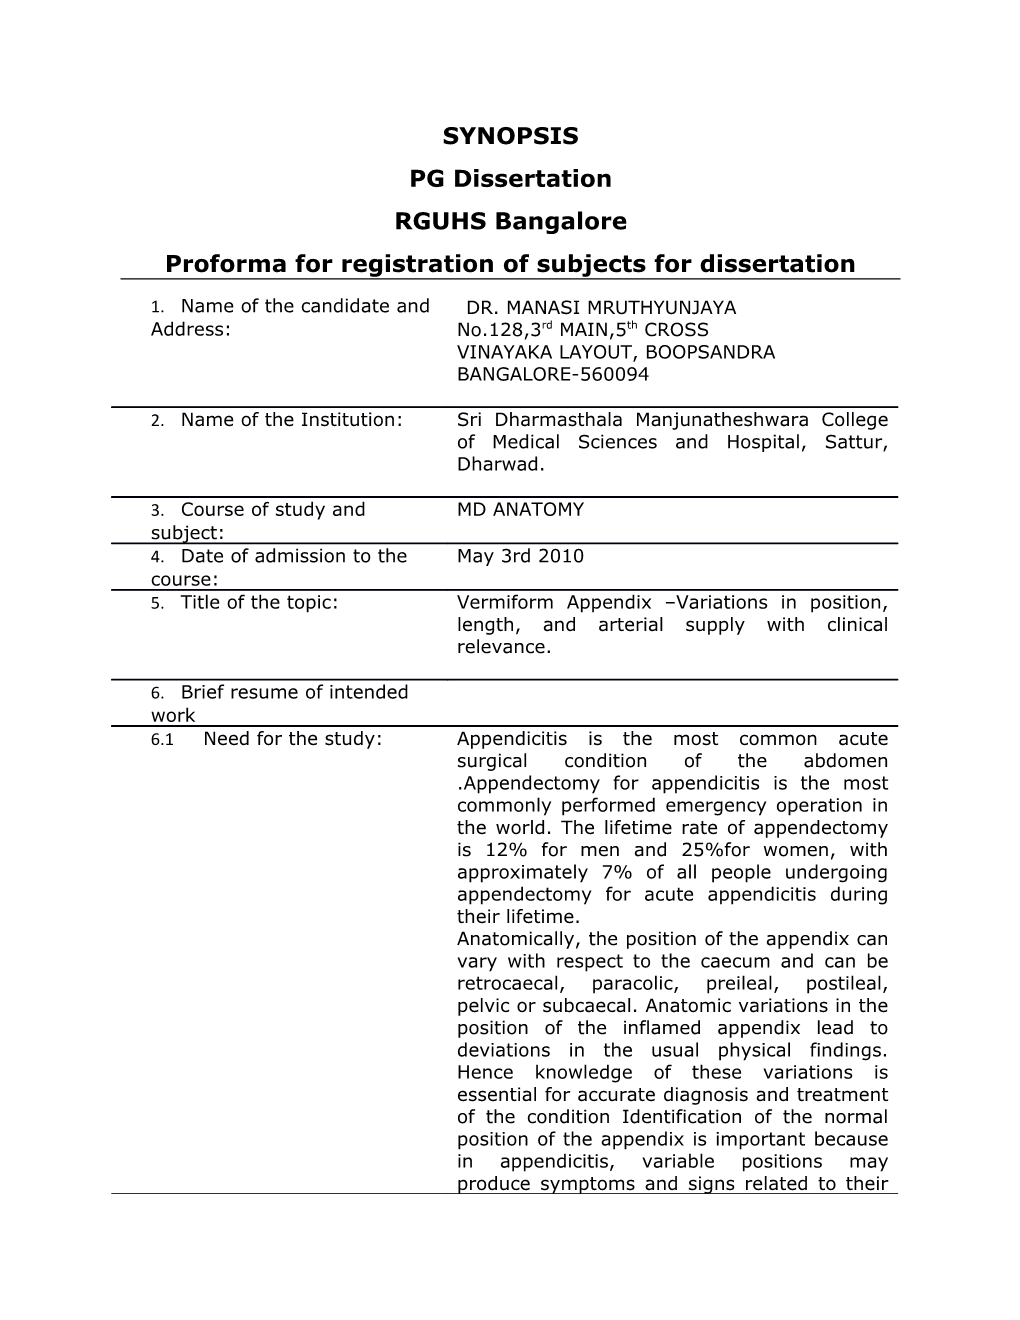 Proforma for Registration of Subjects for Dissertation